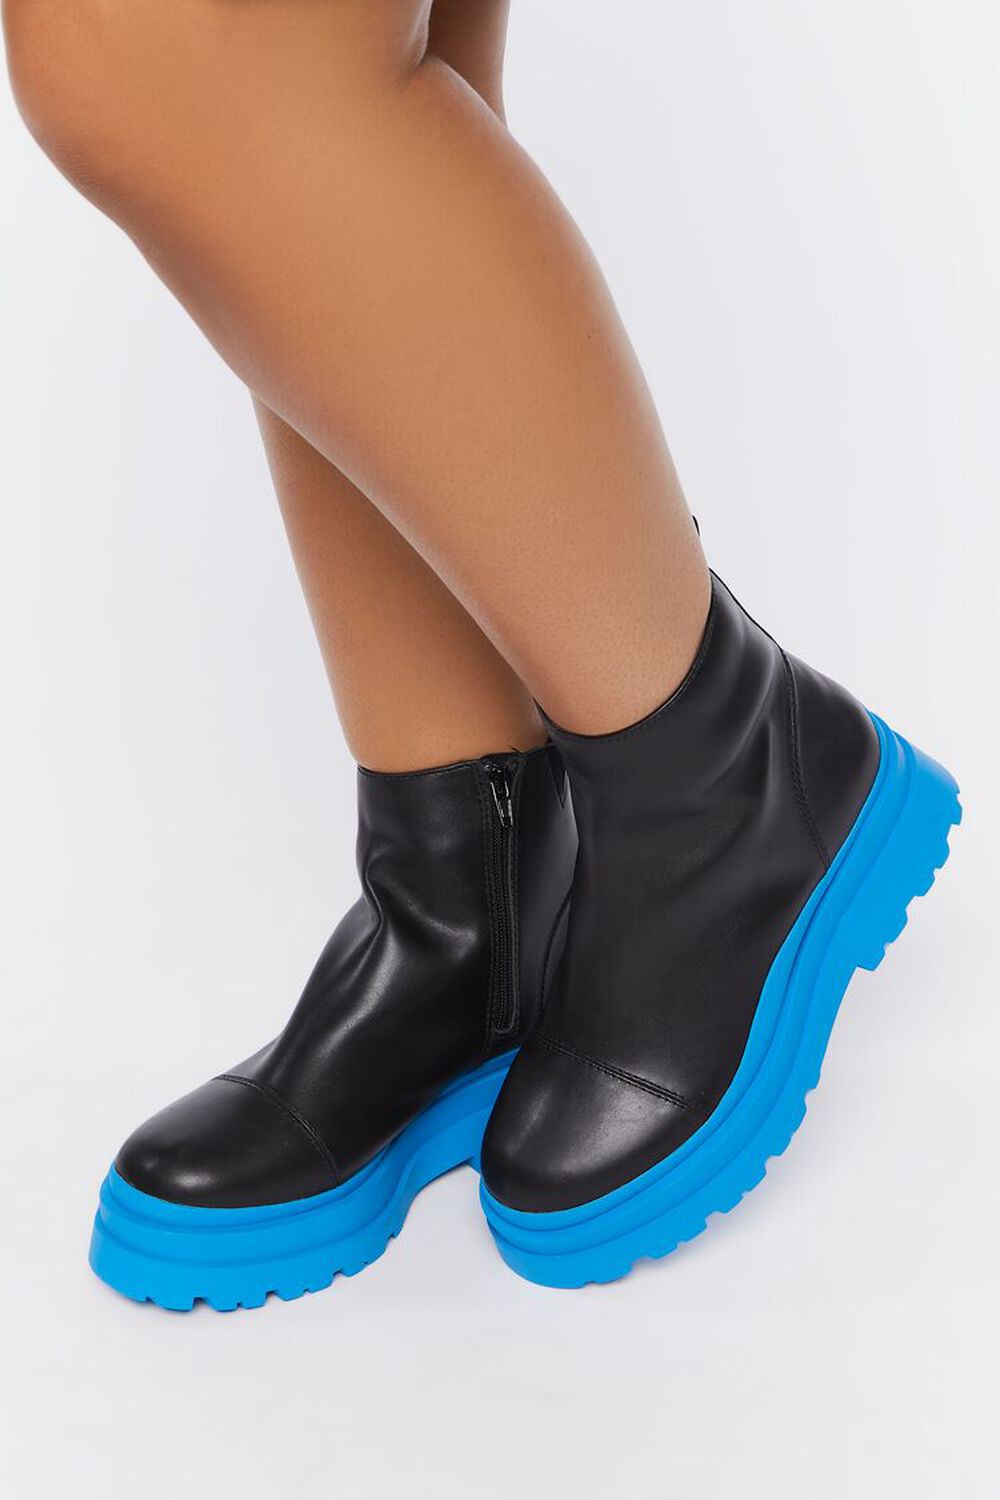 BLACK/BLUE Faux Leather Lug Booties (Wide), image 1